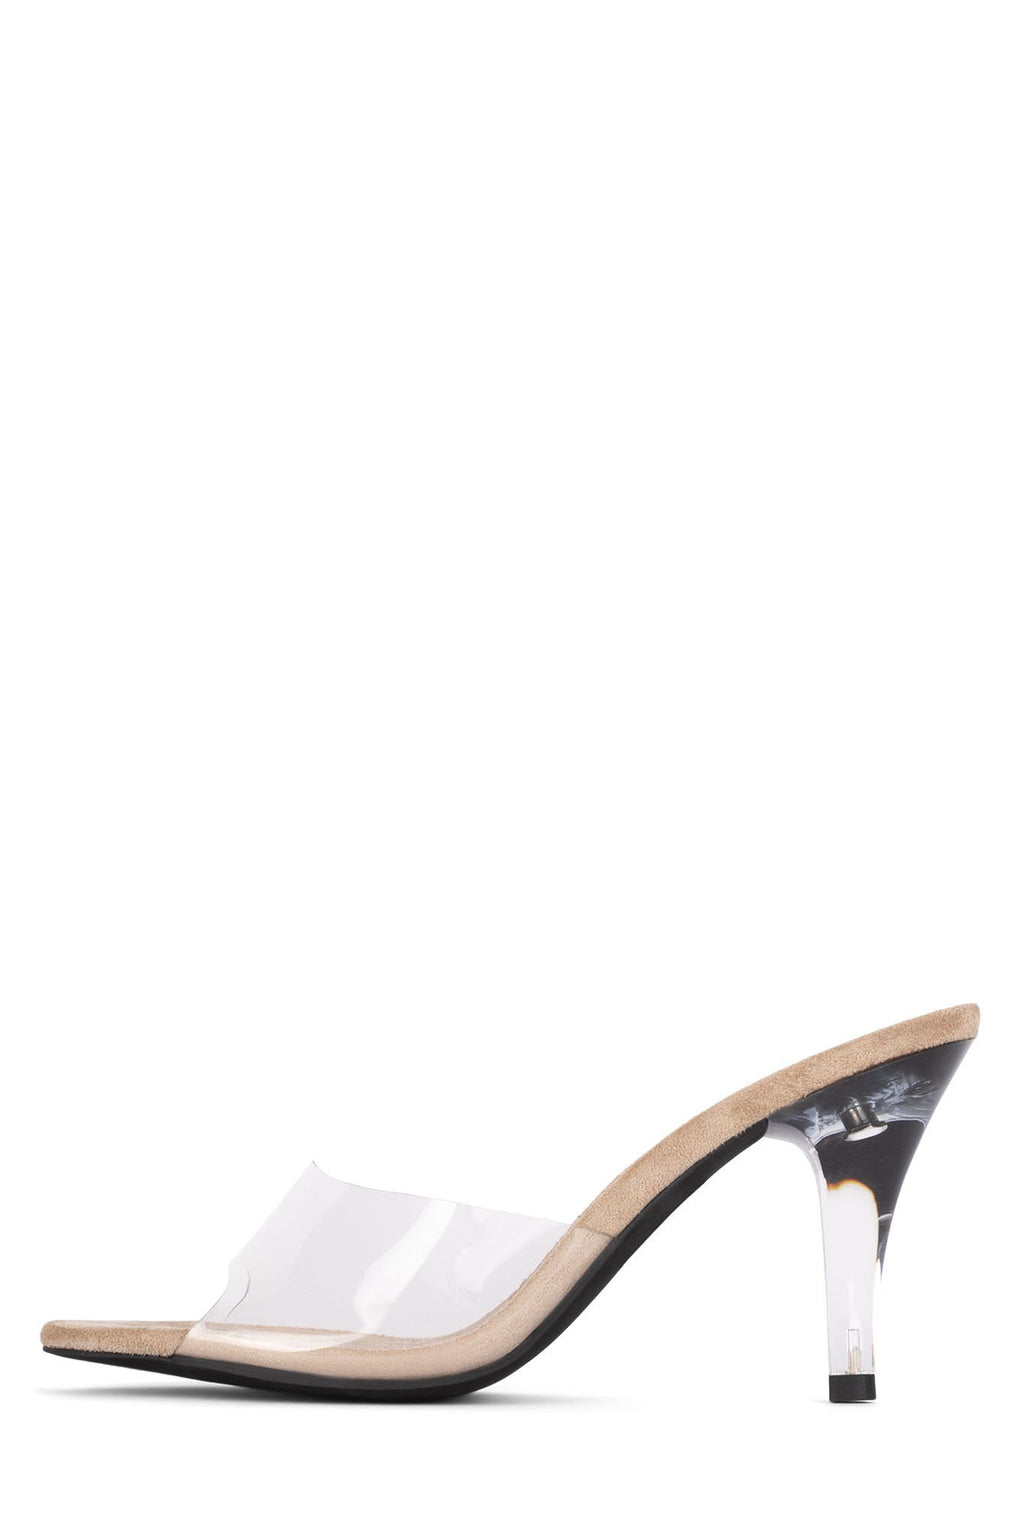 CENDRILLON ST Nude Suede Clear 6 